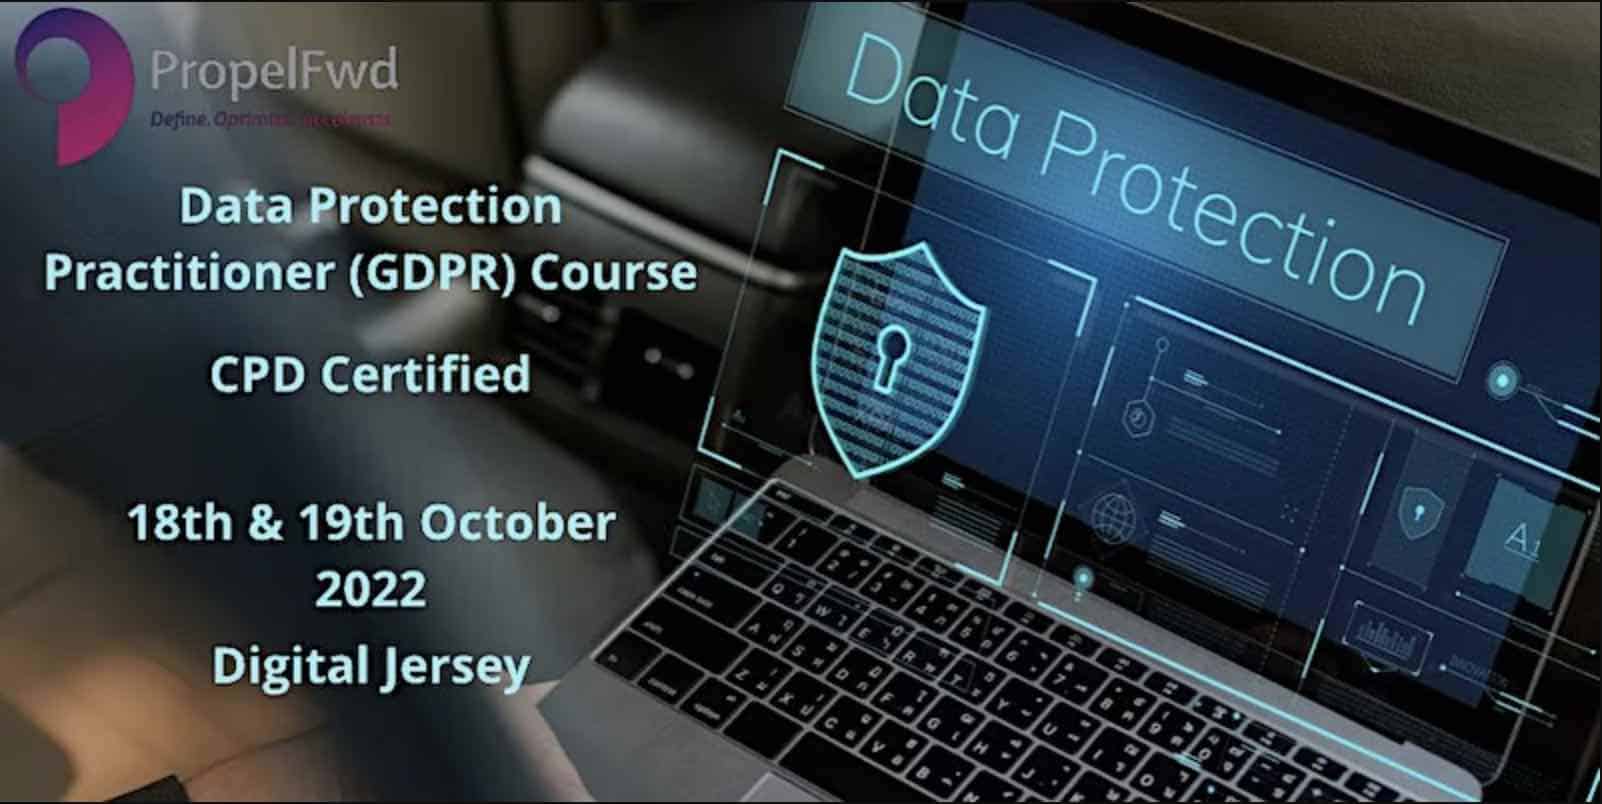 Propelfwd – Data Protection Practitioner (GDPR) course